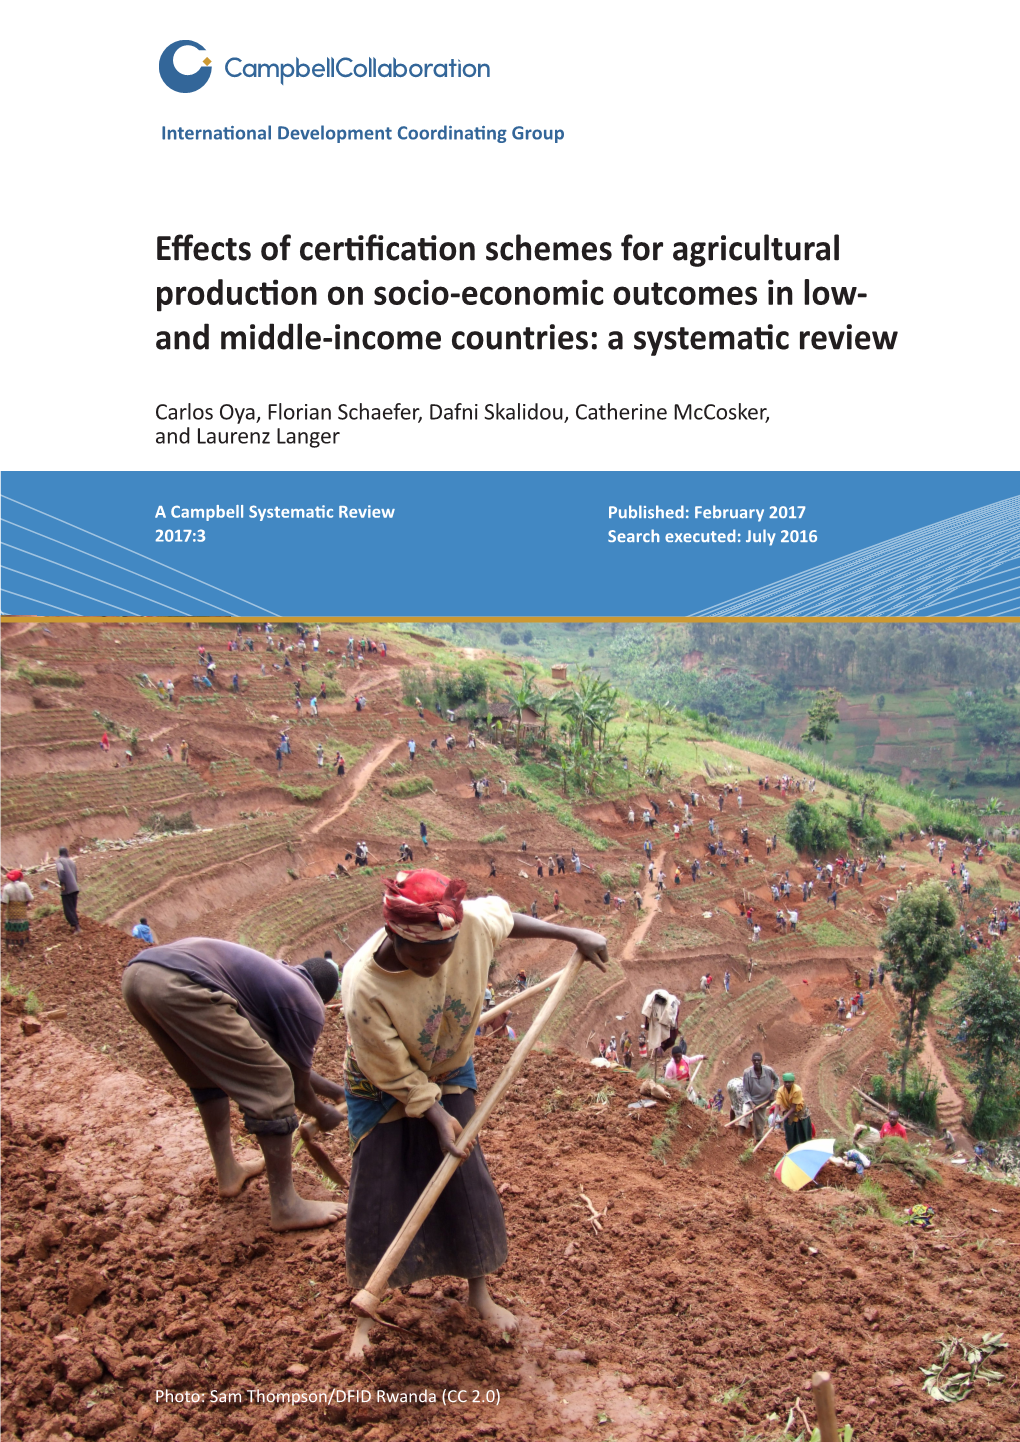 Effects of Certification Schemes for Agricultural Production on Socio-Economic Outcomes in Low- and Middle-Income Countries: a Systematic Review